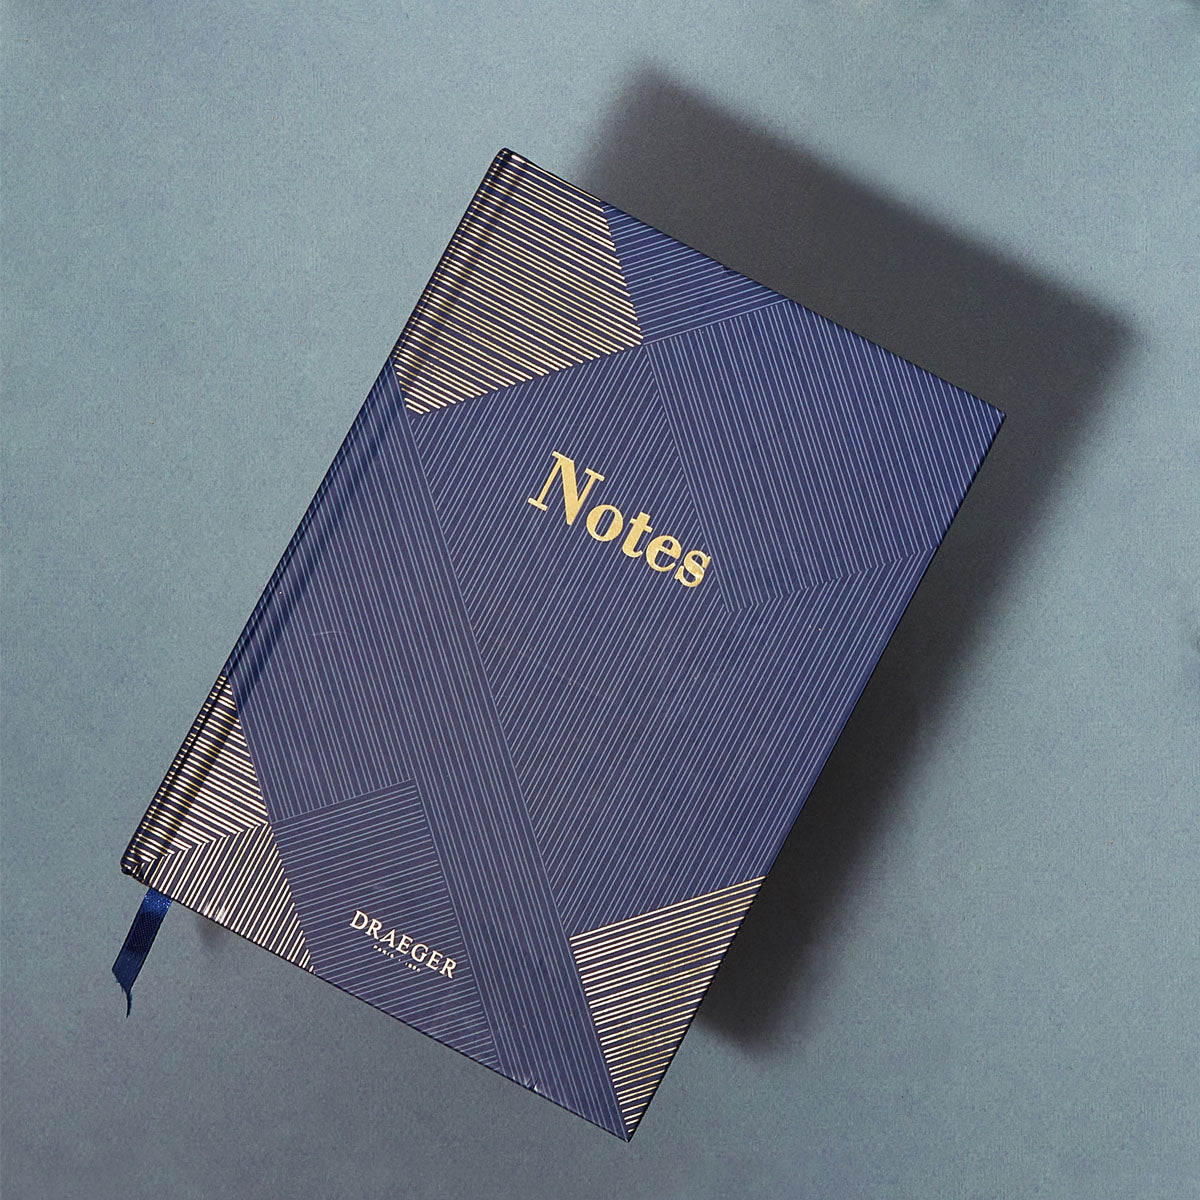 A5 lined notebook - midnight blue